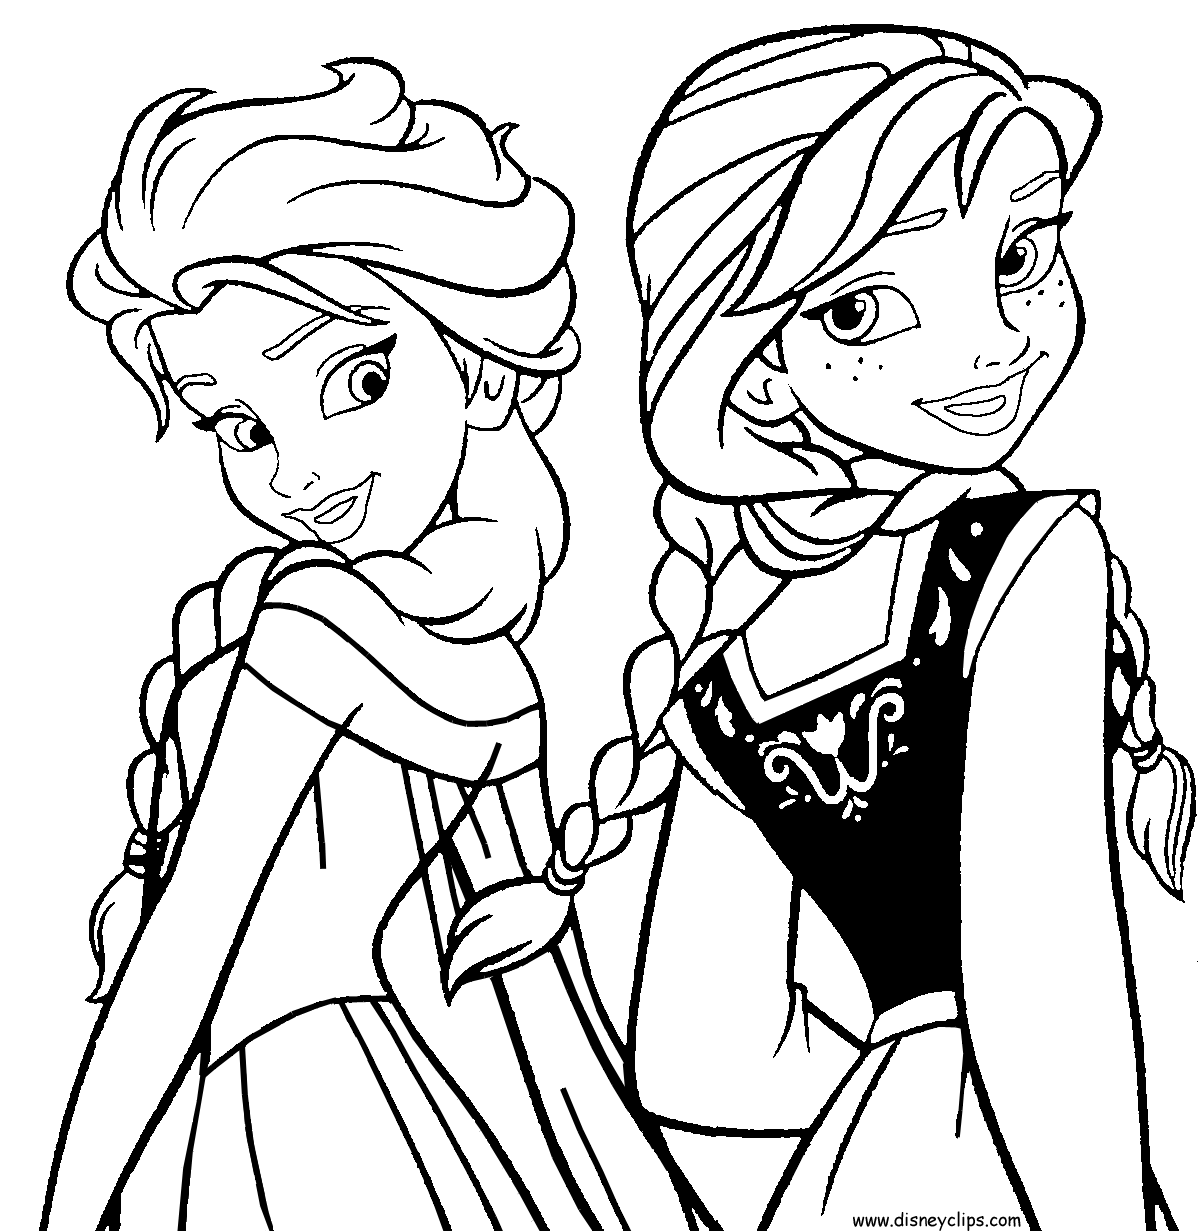 Frozen #2 (Animation Movies) – Printable coloring pages